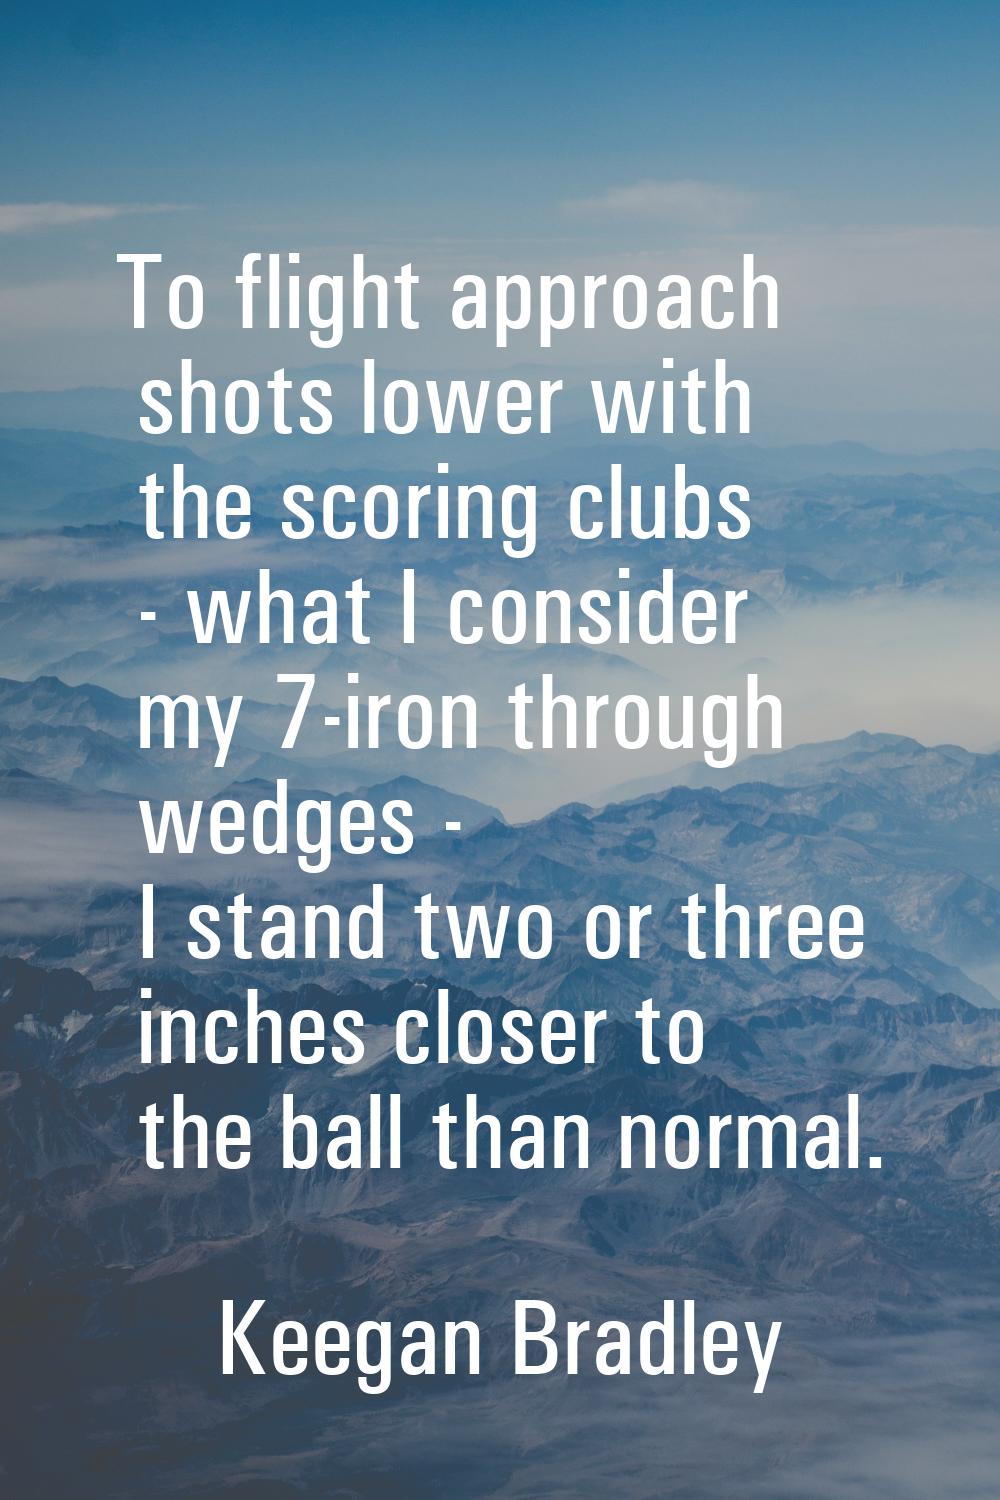 To flight approach shots lower with the scoring clubs - what I consider my 7-iron through wedges - 